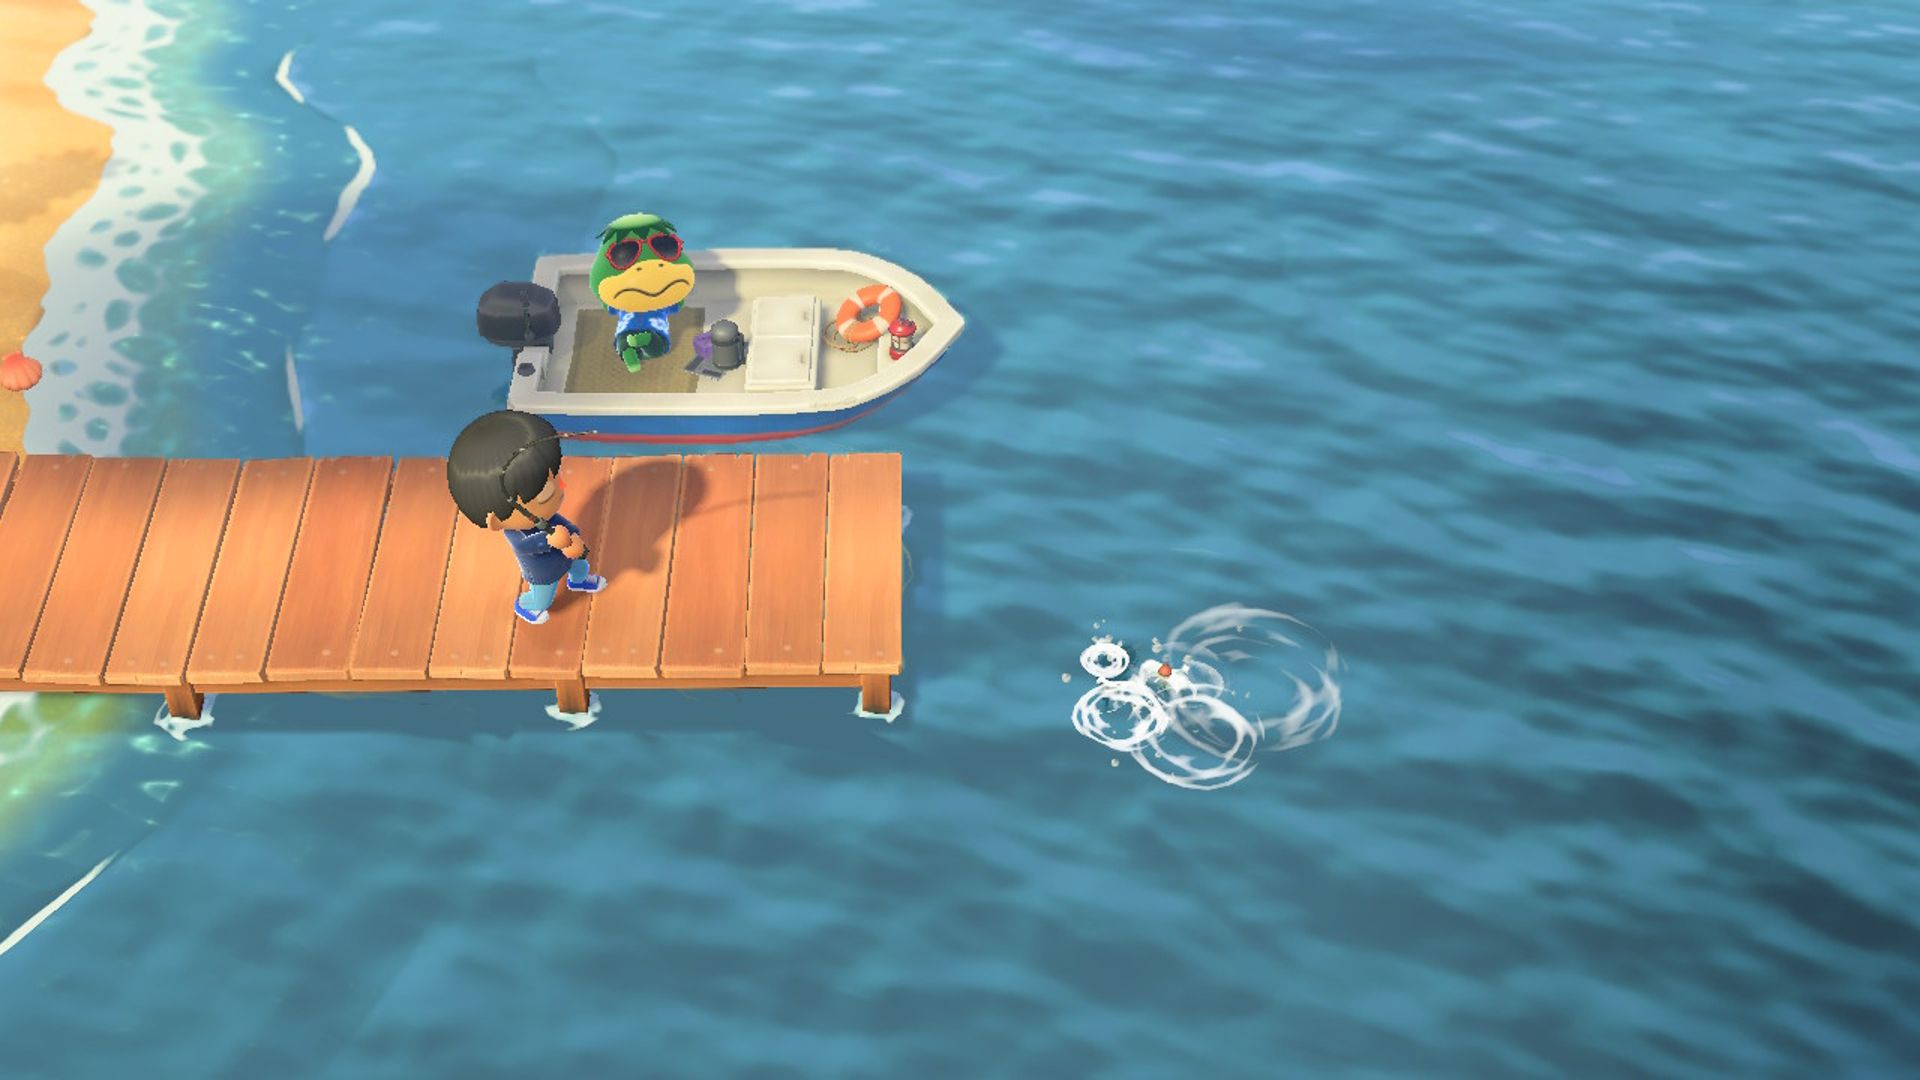 An Animal Crossing New Horizons player struggles to catch fish off an island dock while villagers watch and relax on a speedboat